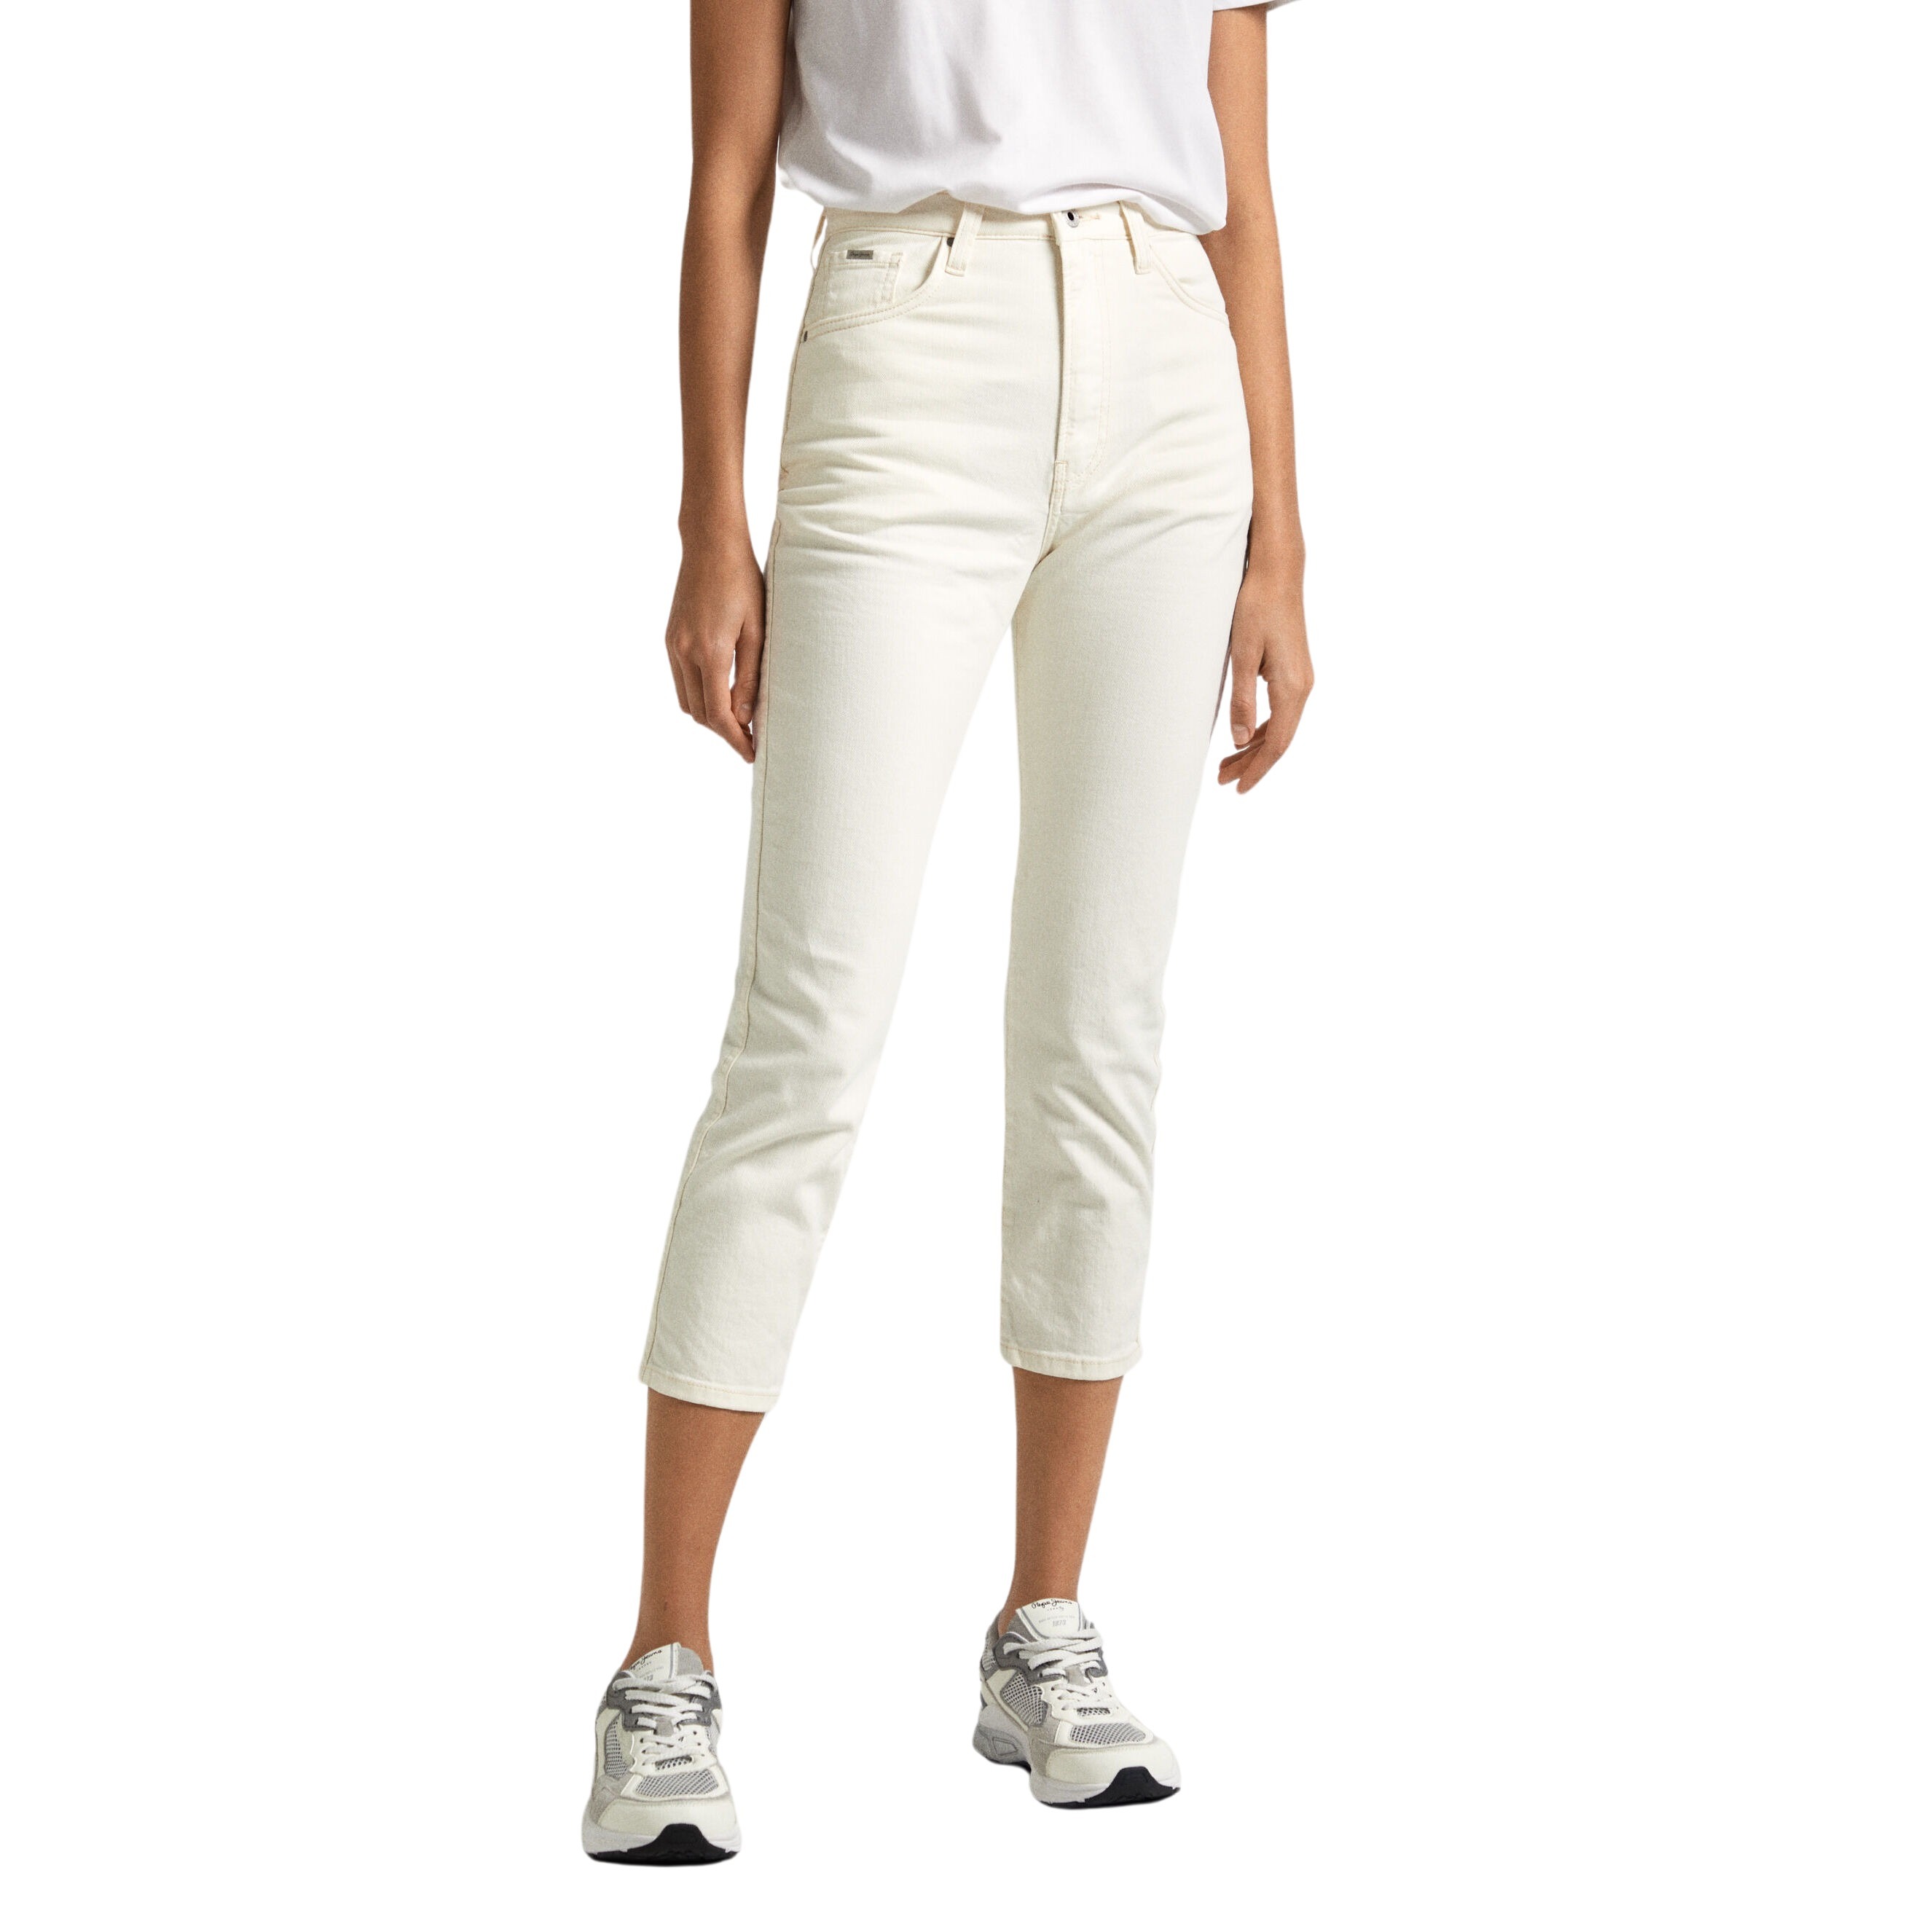 women's high-waisted skinny jeans pepe jeans